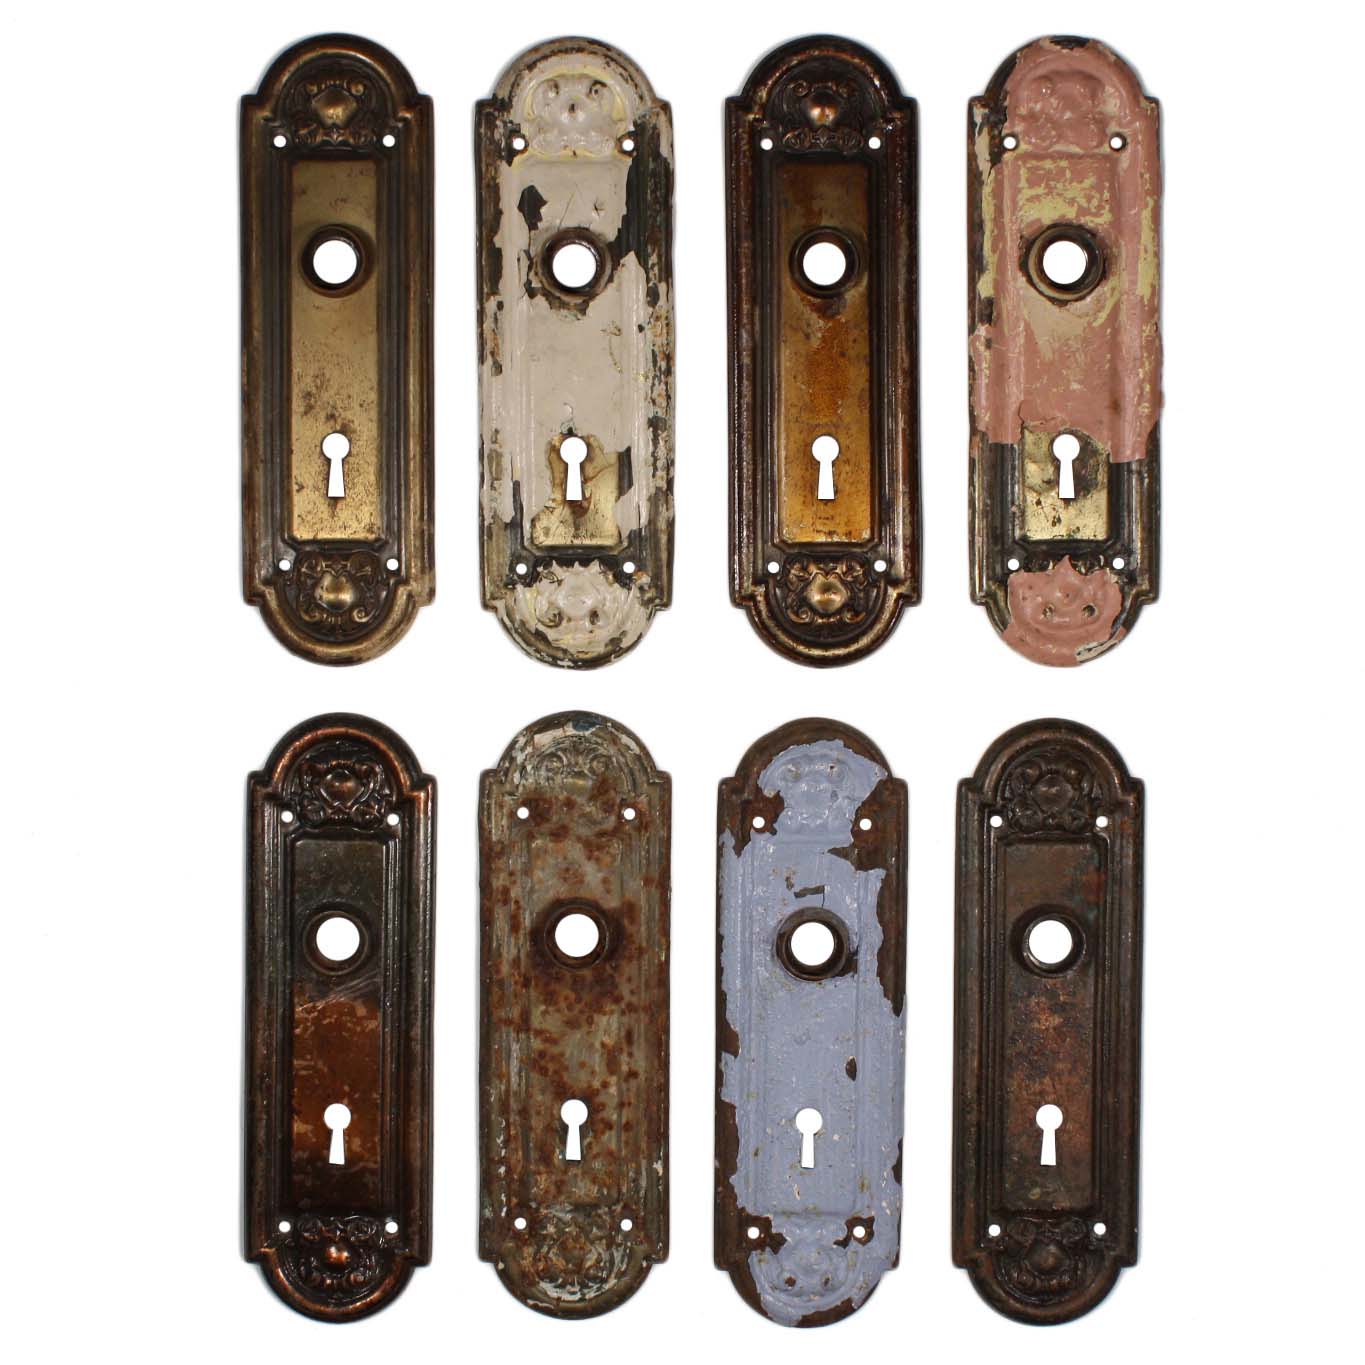 Beautiful Antique Arched Door Plates, "Crofton" by Reading Hardware, c. 1910 -38830